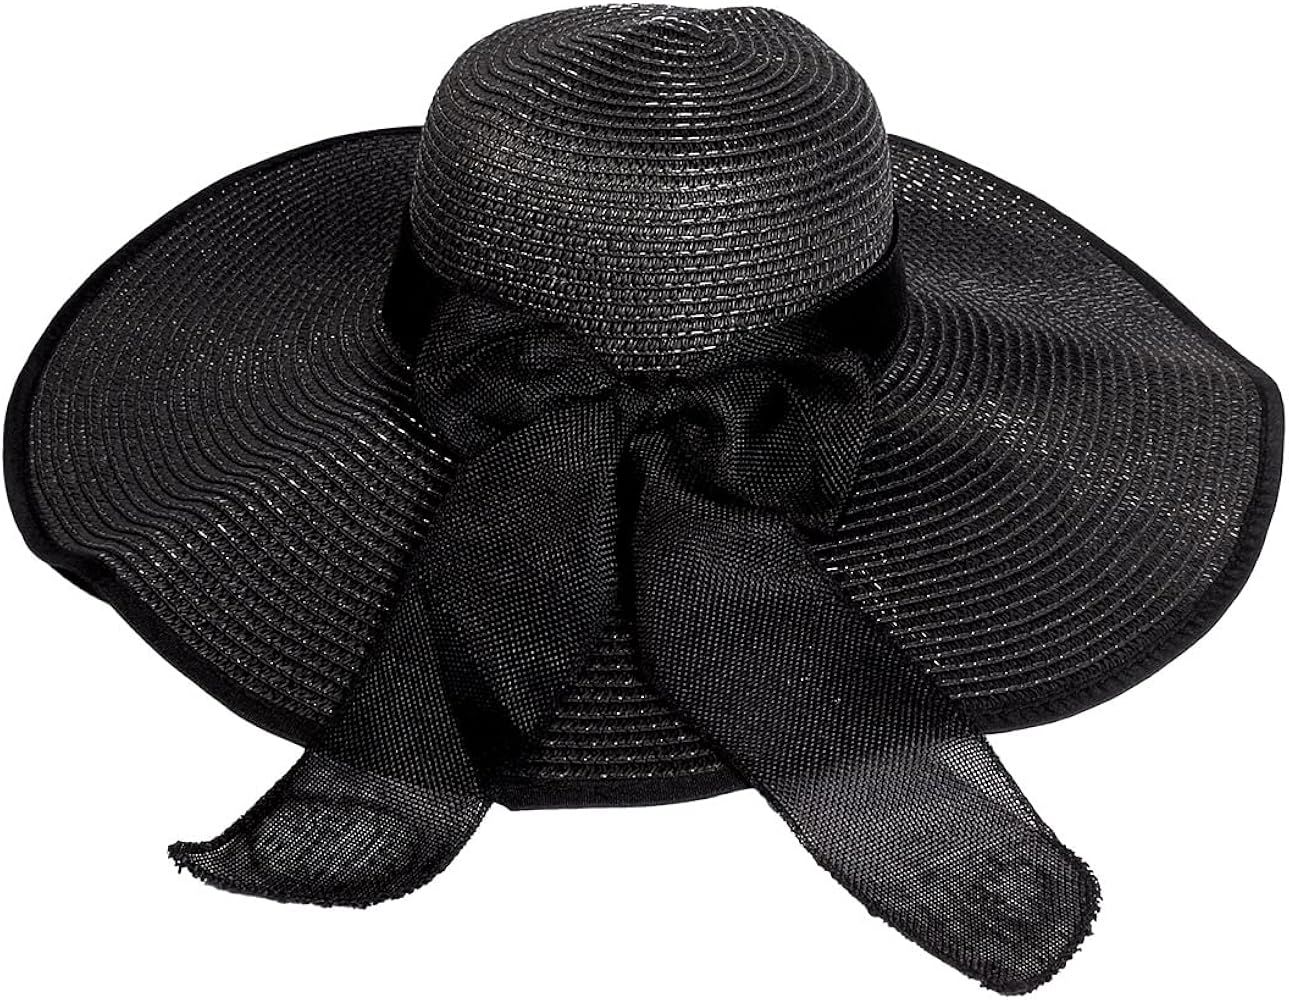 TANOSII Straw Sun Hat Wide Brim Beach Hat Foldable Roll up UV Protection Floppy Hats for Women | Amazon (US)